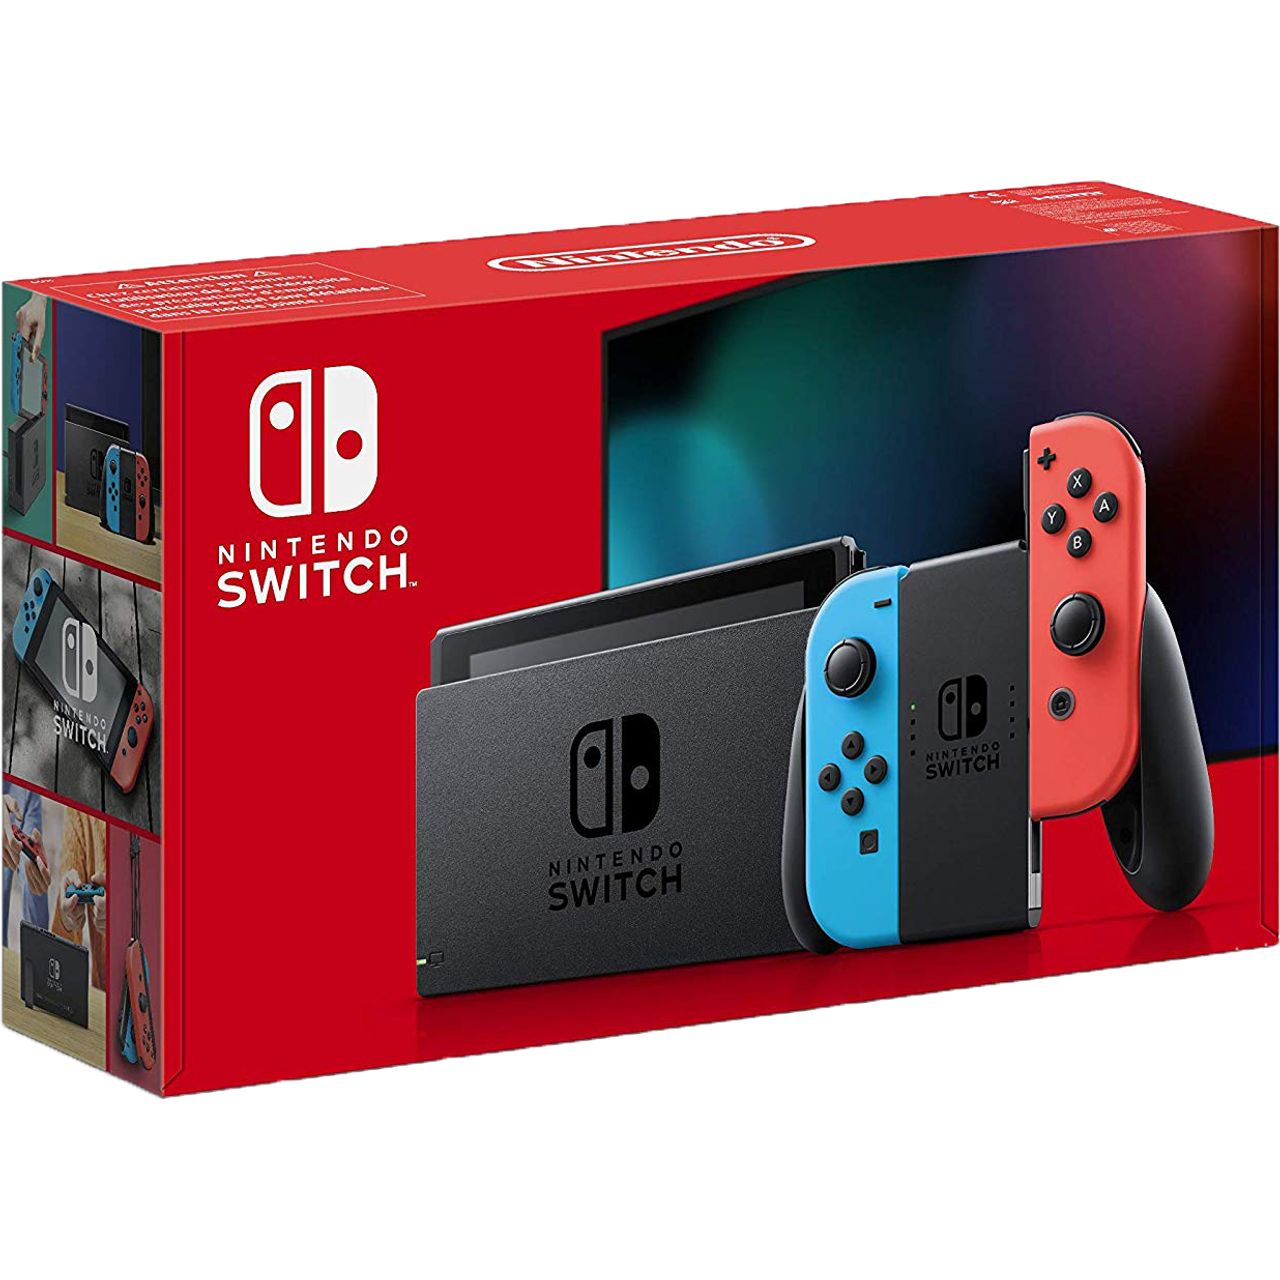 Nintendo Switch 32GB Review